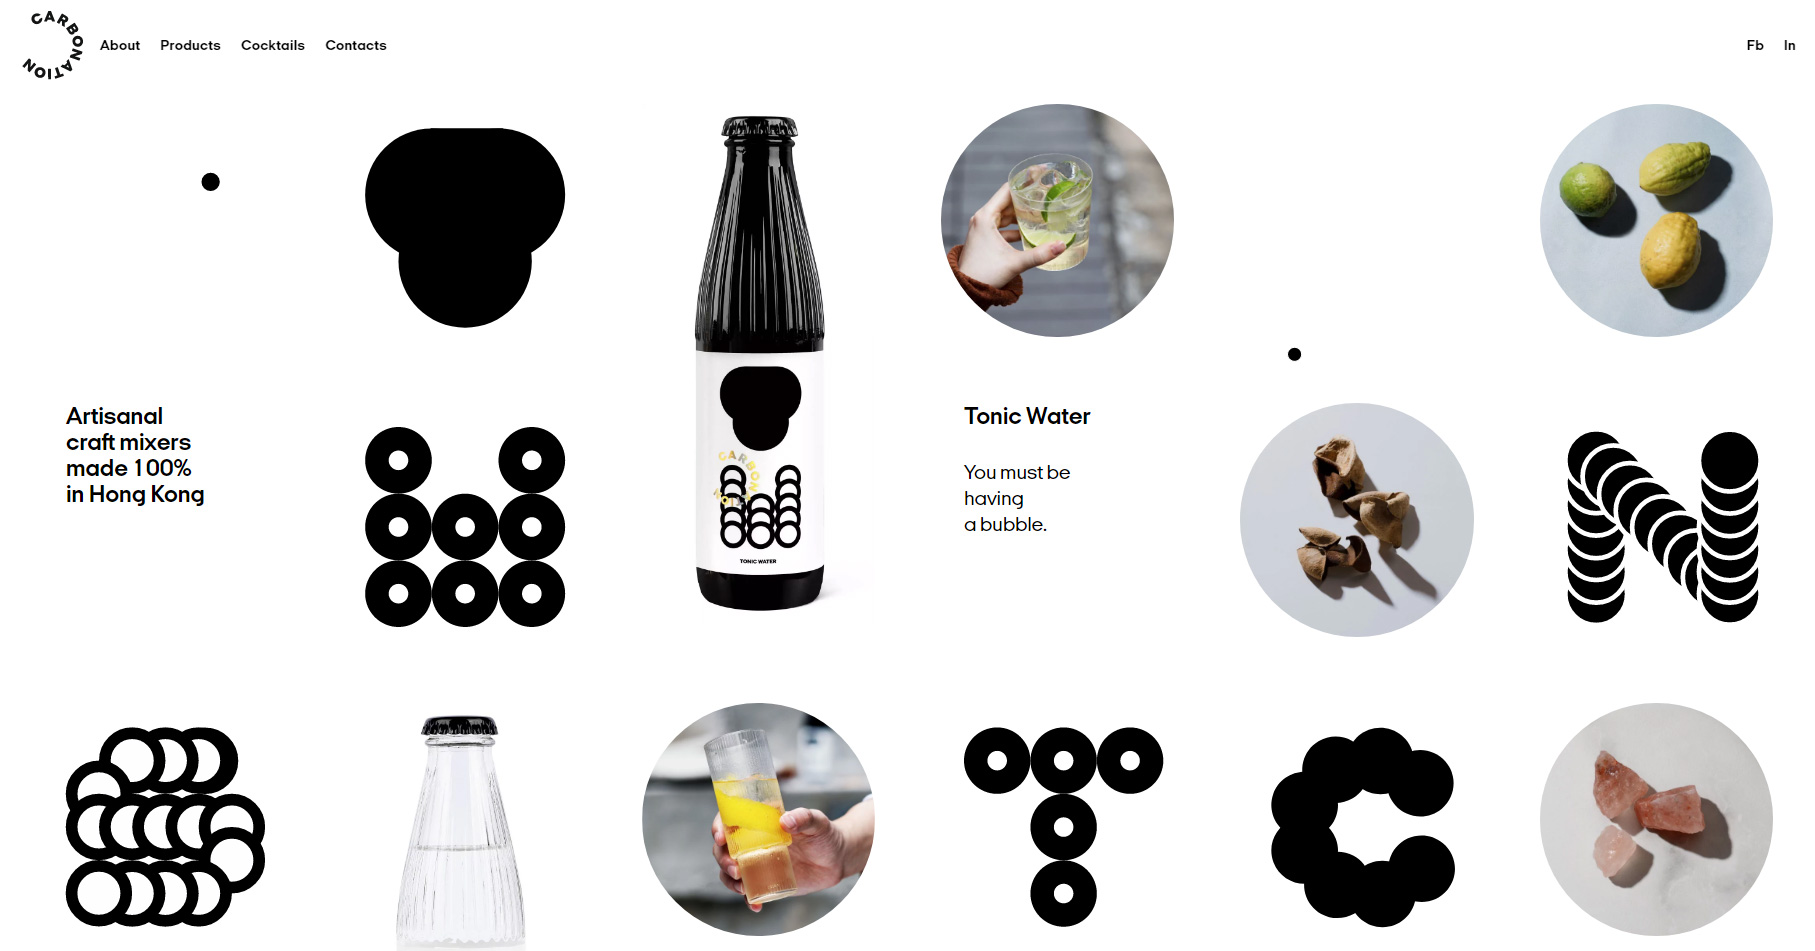 The Carbonation - Website of the Day